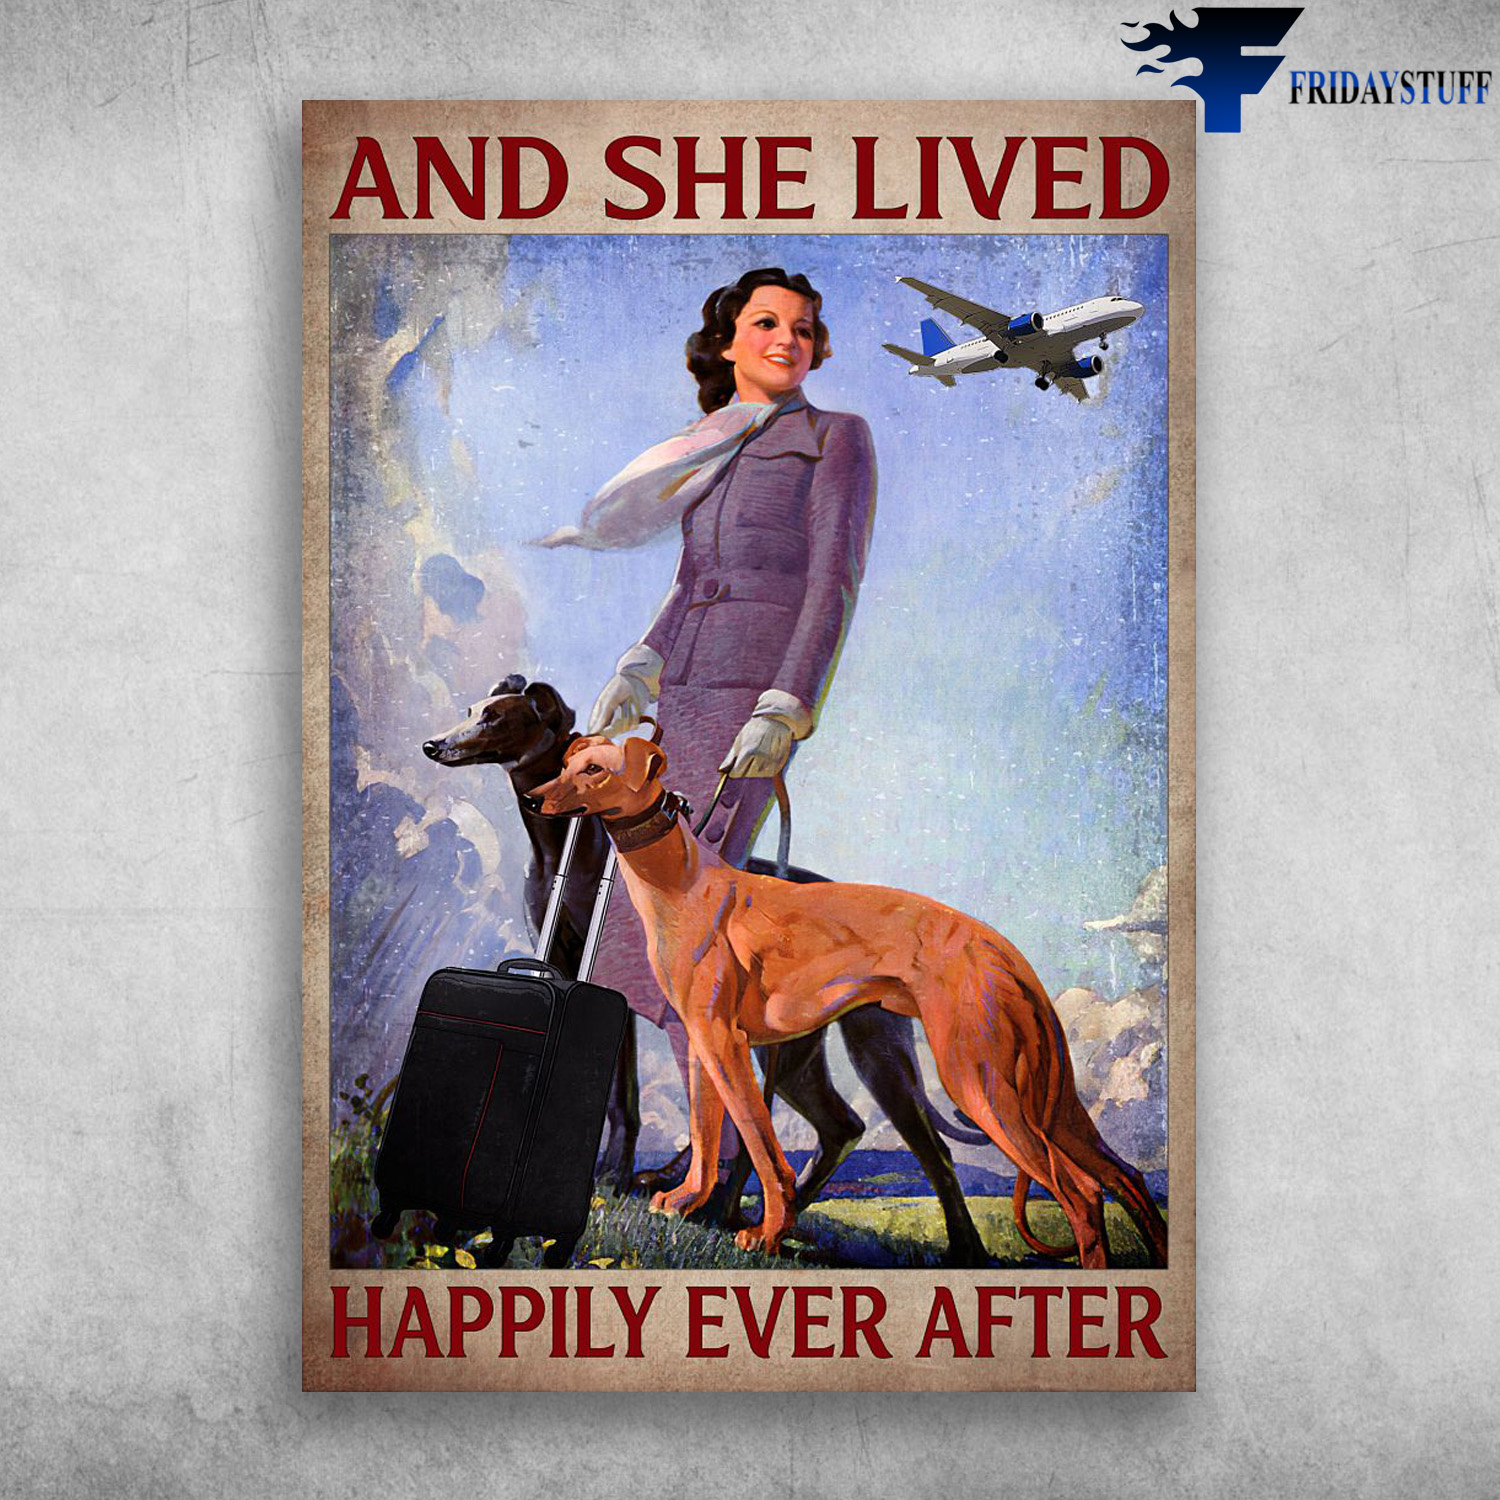 Flight Attendant, Dog And Plane - And She Lived, Happily Ever After, Traveling With Dog